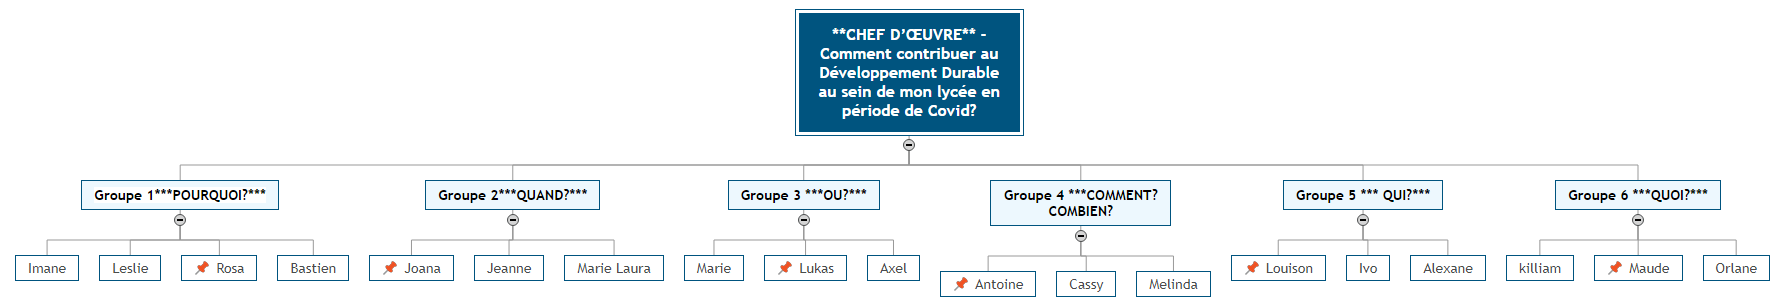 Organigramme CHEF D'OEUVRE Mind Map